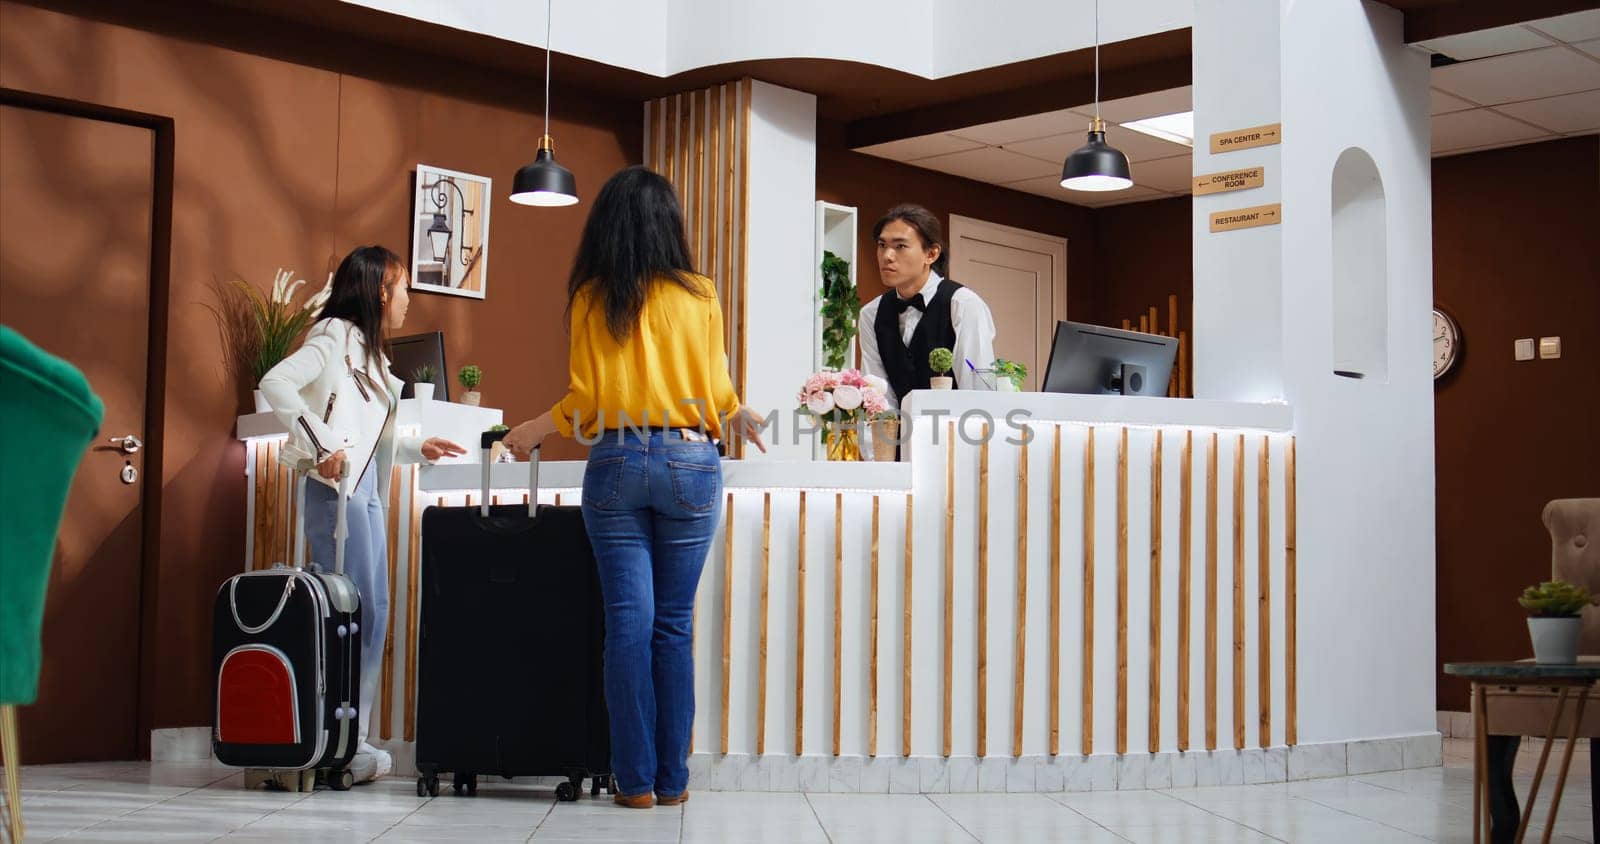 Asian tourists entering hotel lobby and using service bell by DCStudio